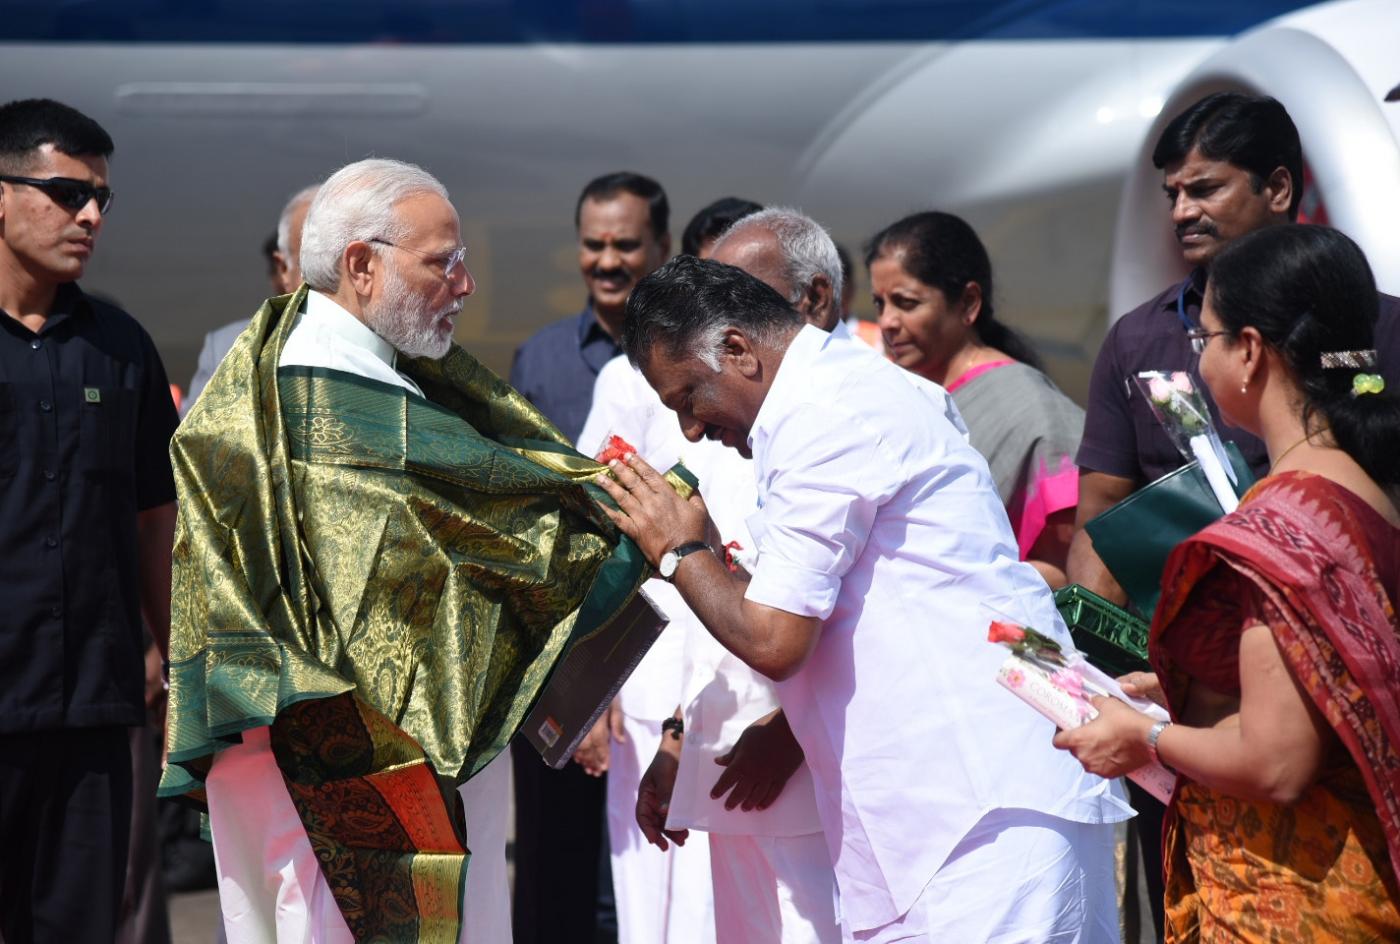 Chennai: Prime Minister Narendra Modi being welcomed by the Deputy Chief Minister of Tamil Nadu O. Panneerselvam, on his arrival, at Chennai, Tamil Nadu on April 12, 2018. (Photo: IANS/PIB) by . 